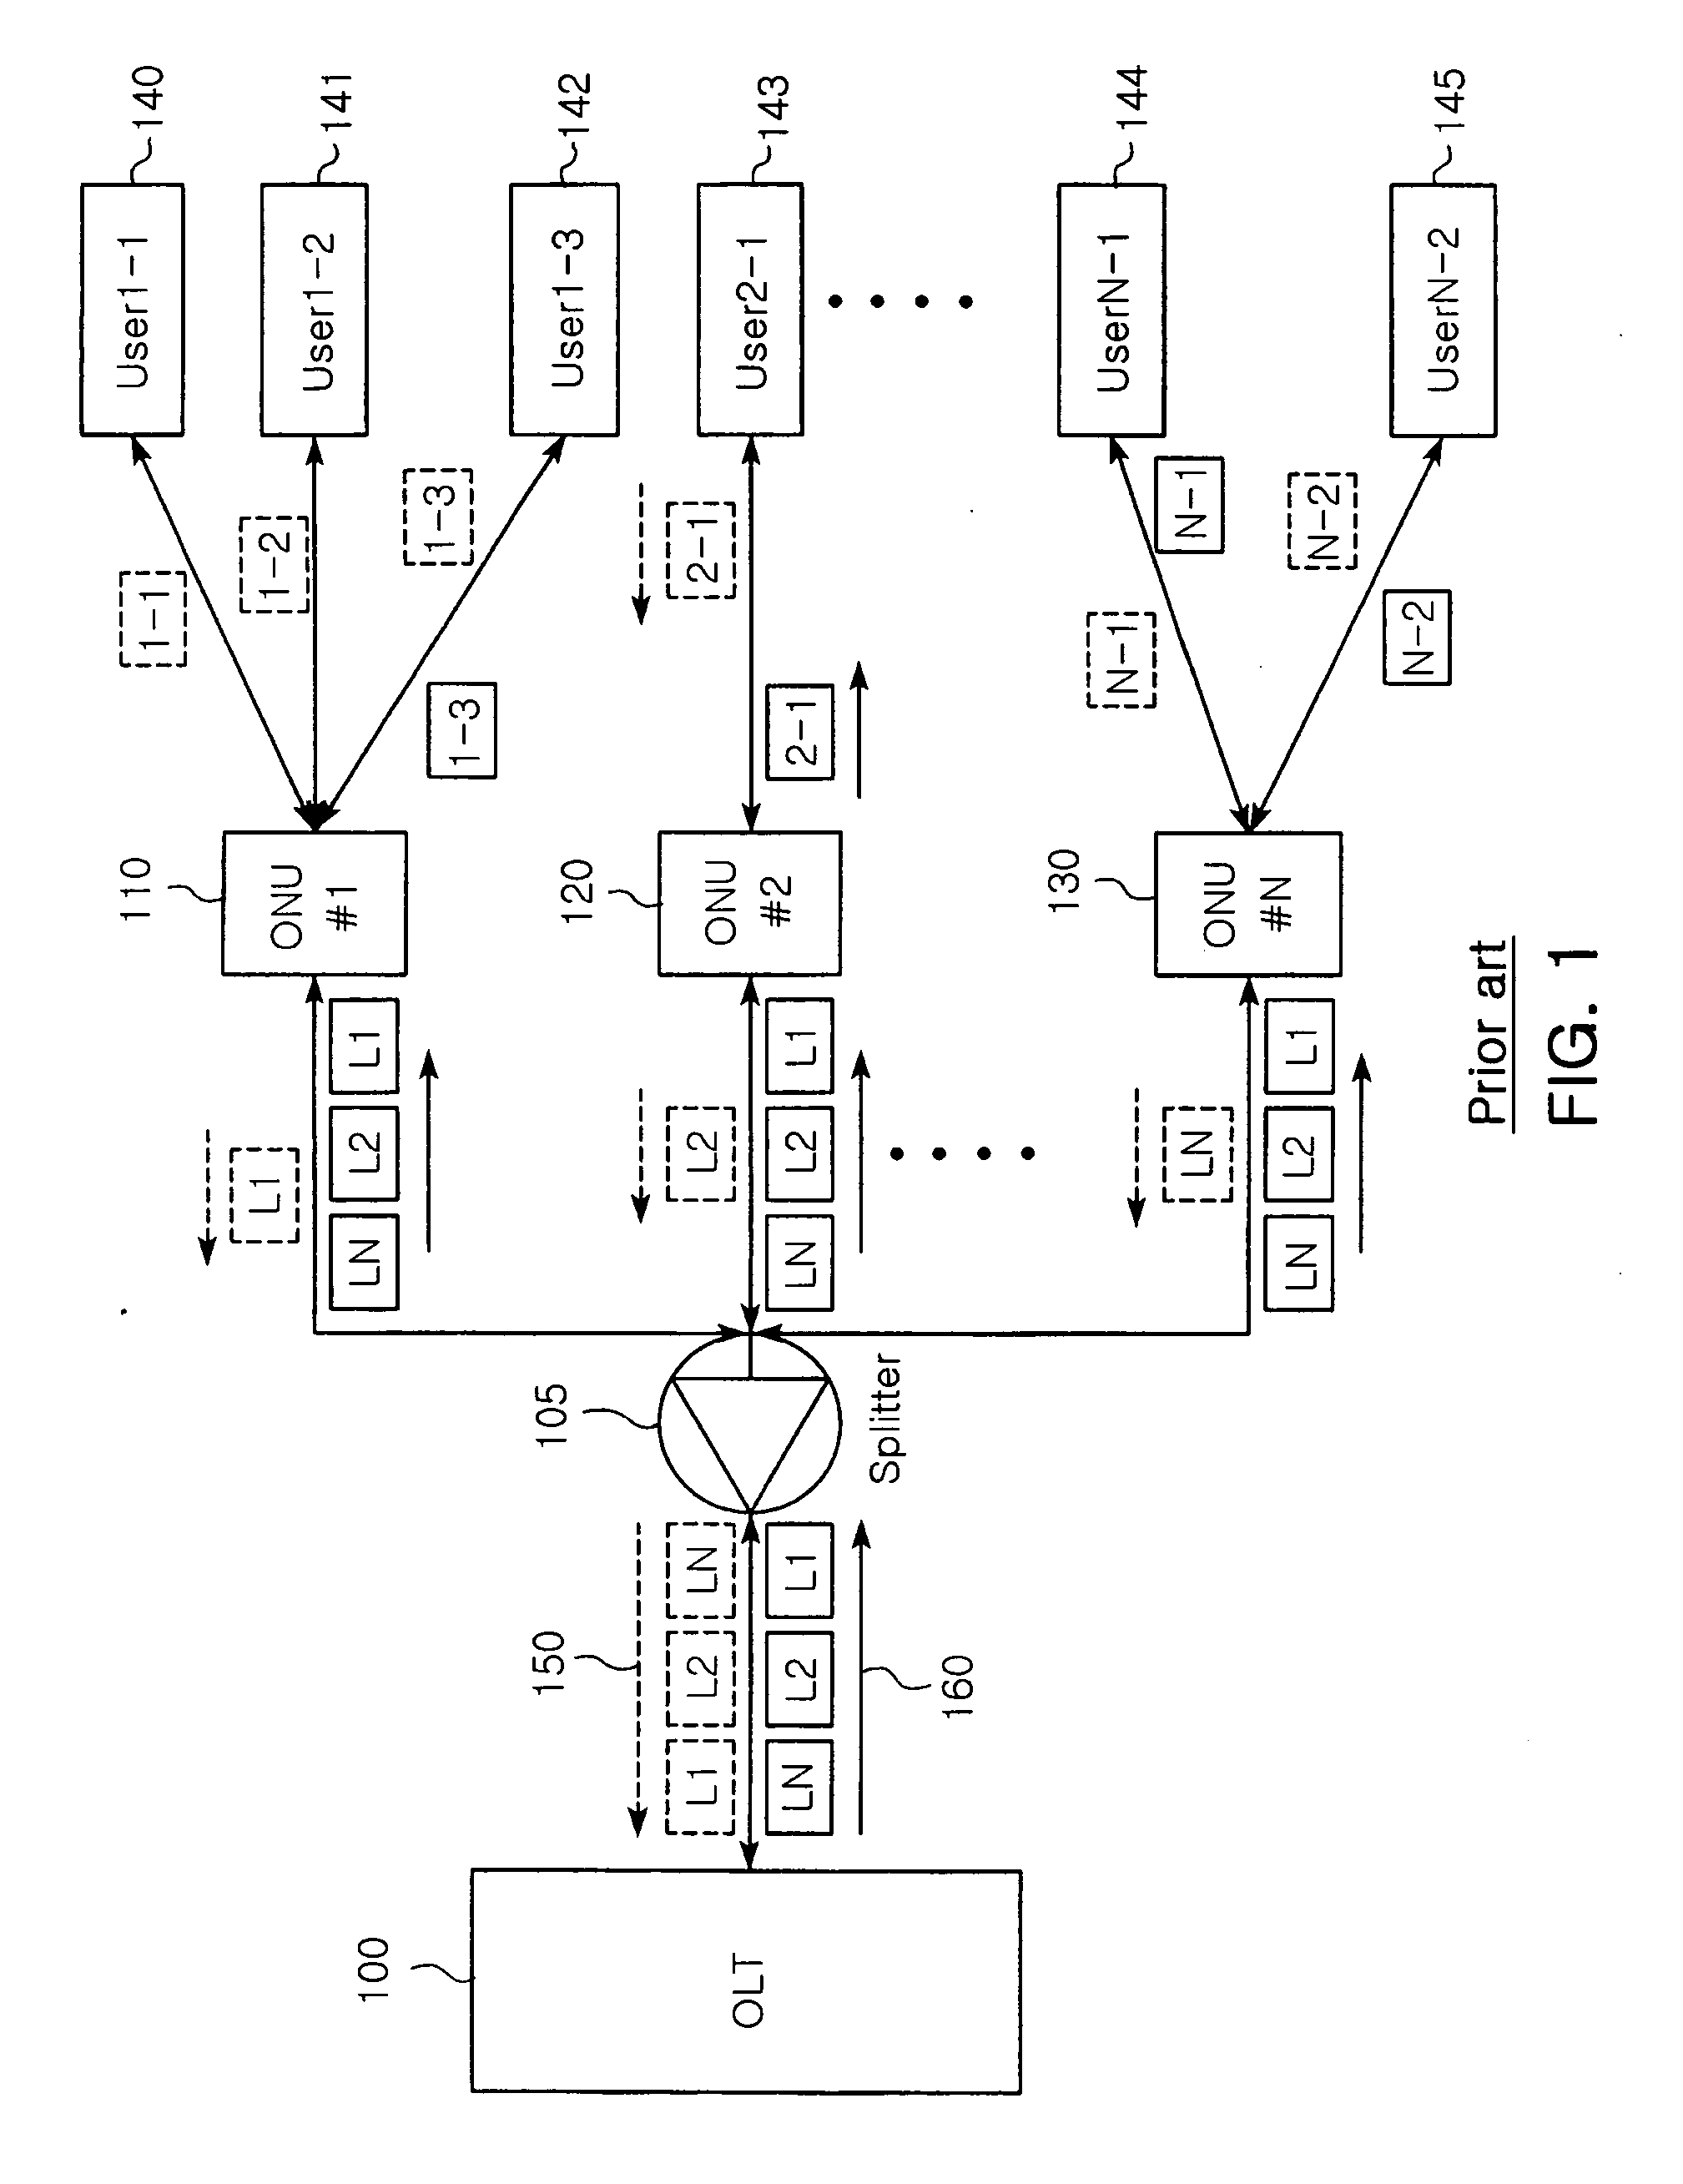 Bandwidth allocation device for guaranteeing Qos in ethernet passive optical access network